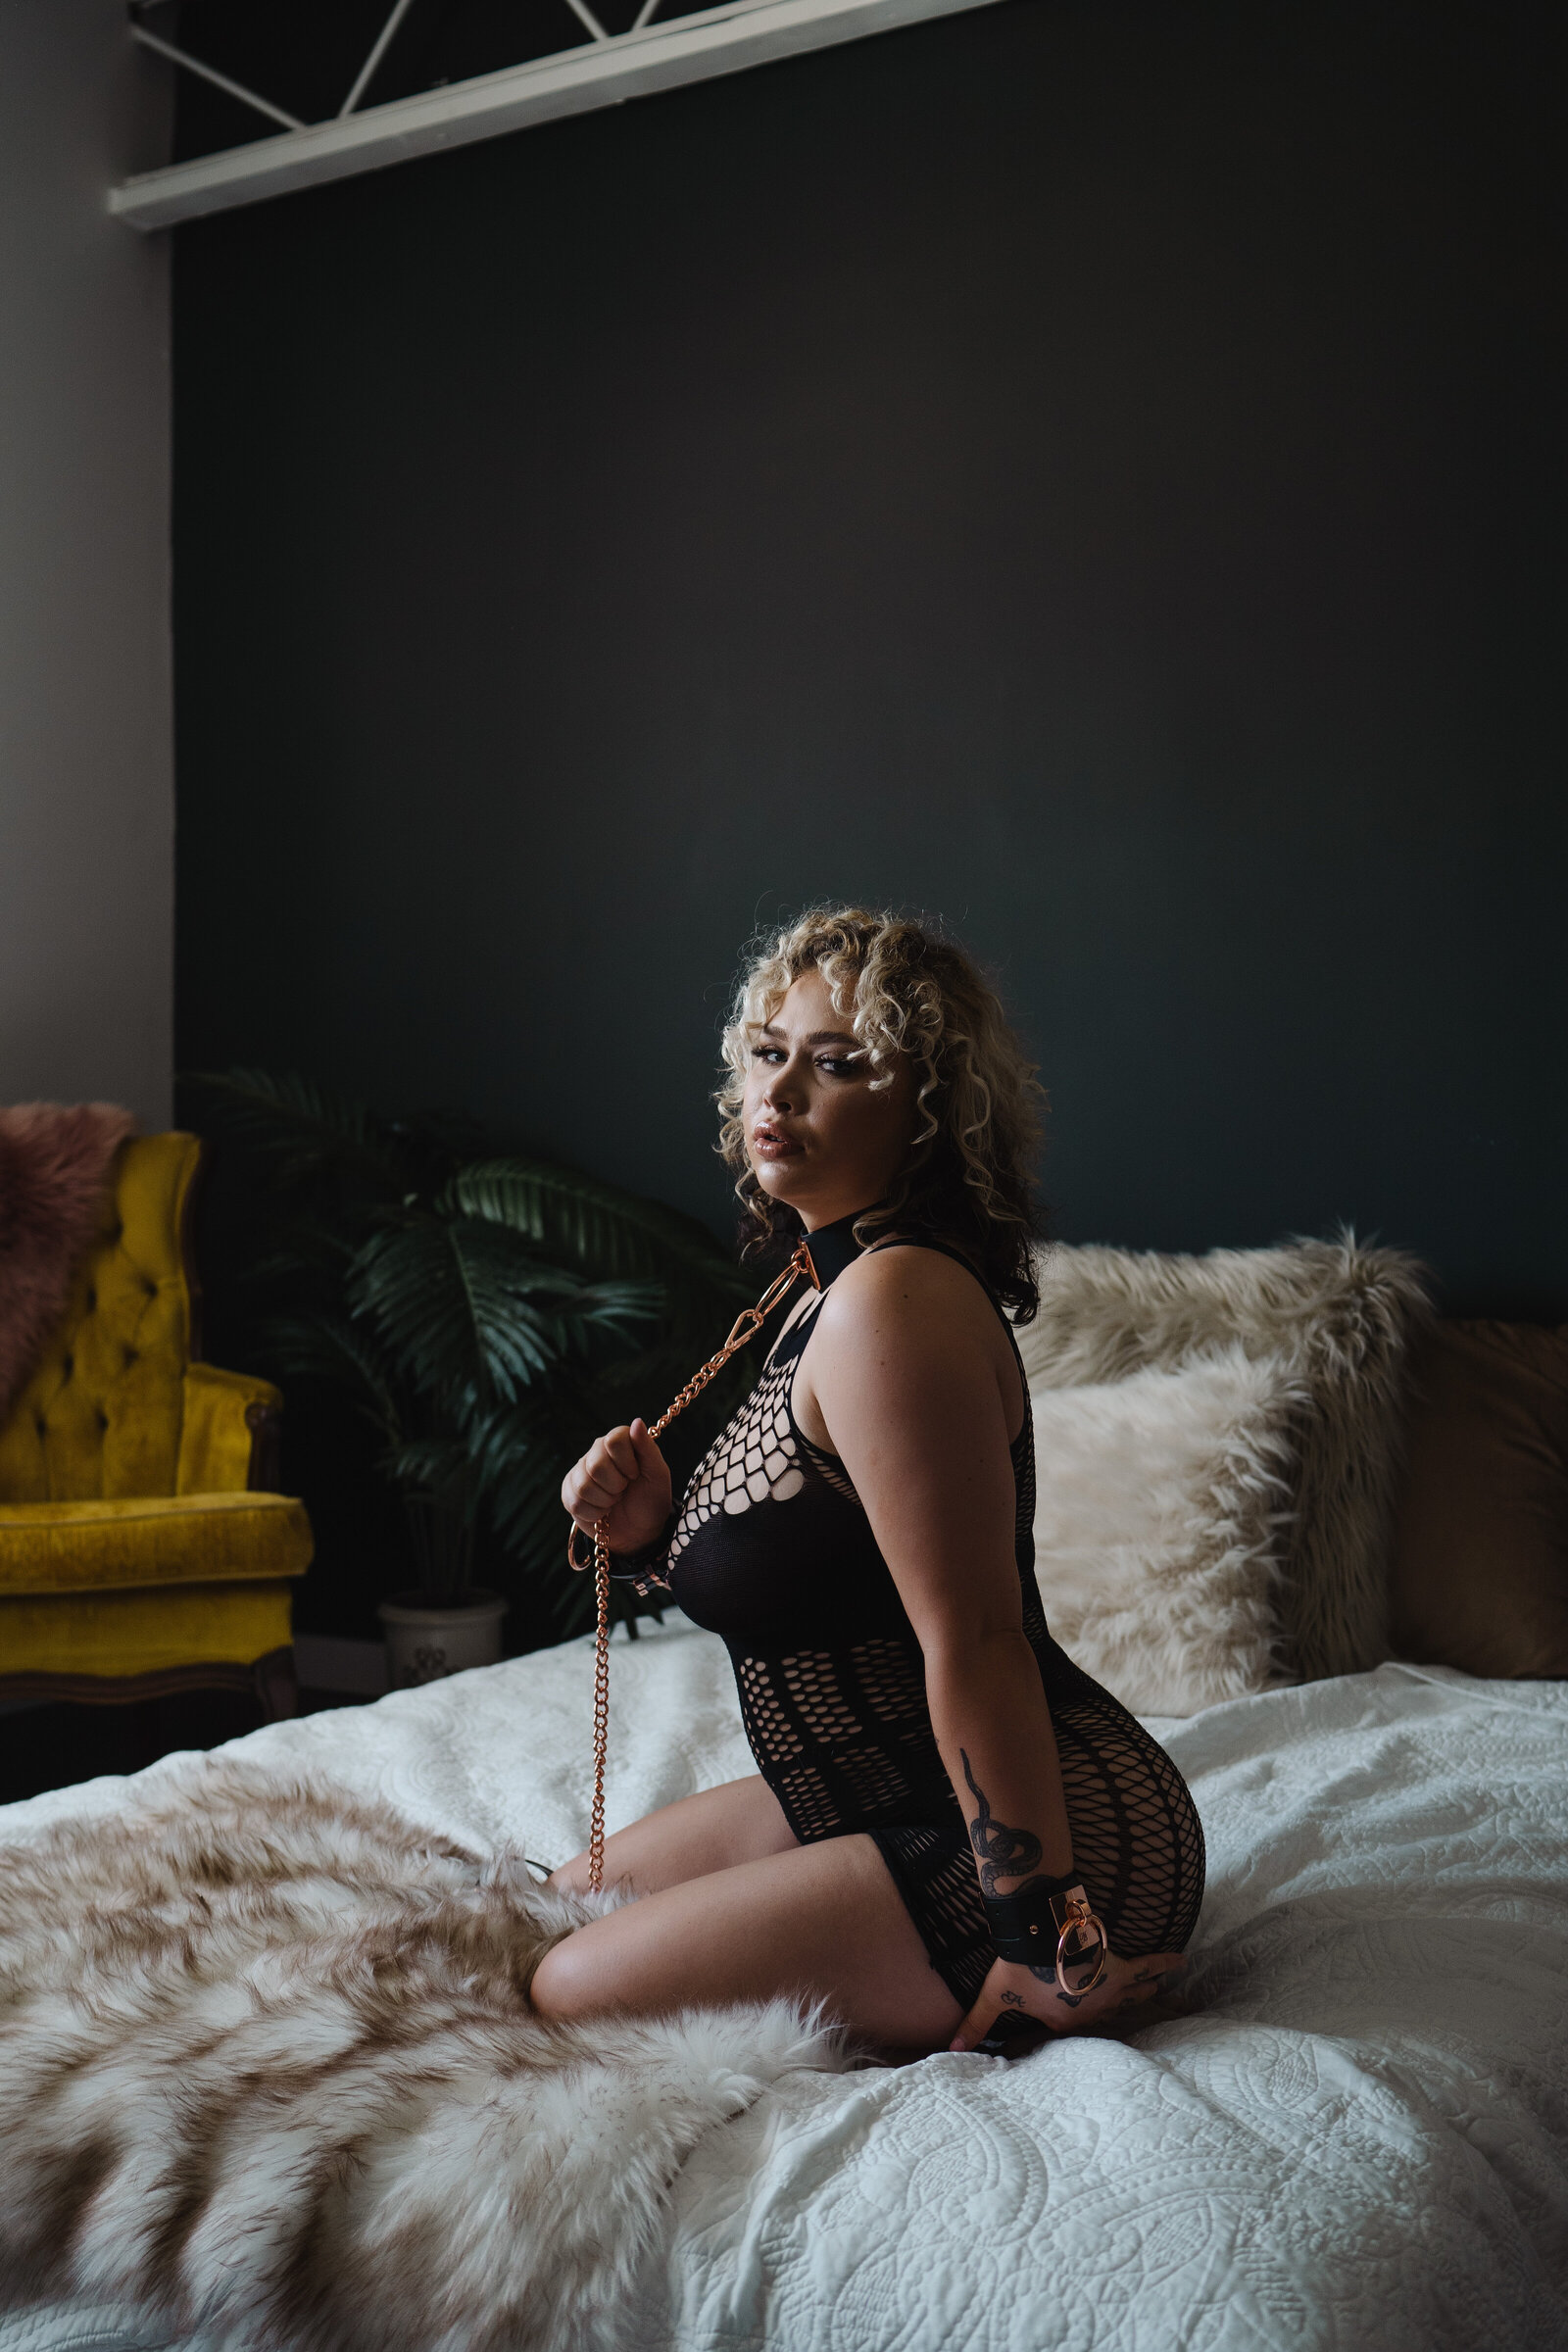 Woman sitting on bed with collar and cuffs on during her boudoir session.